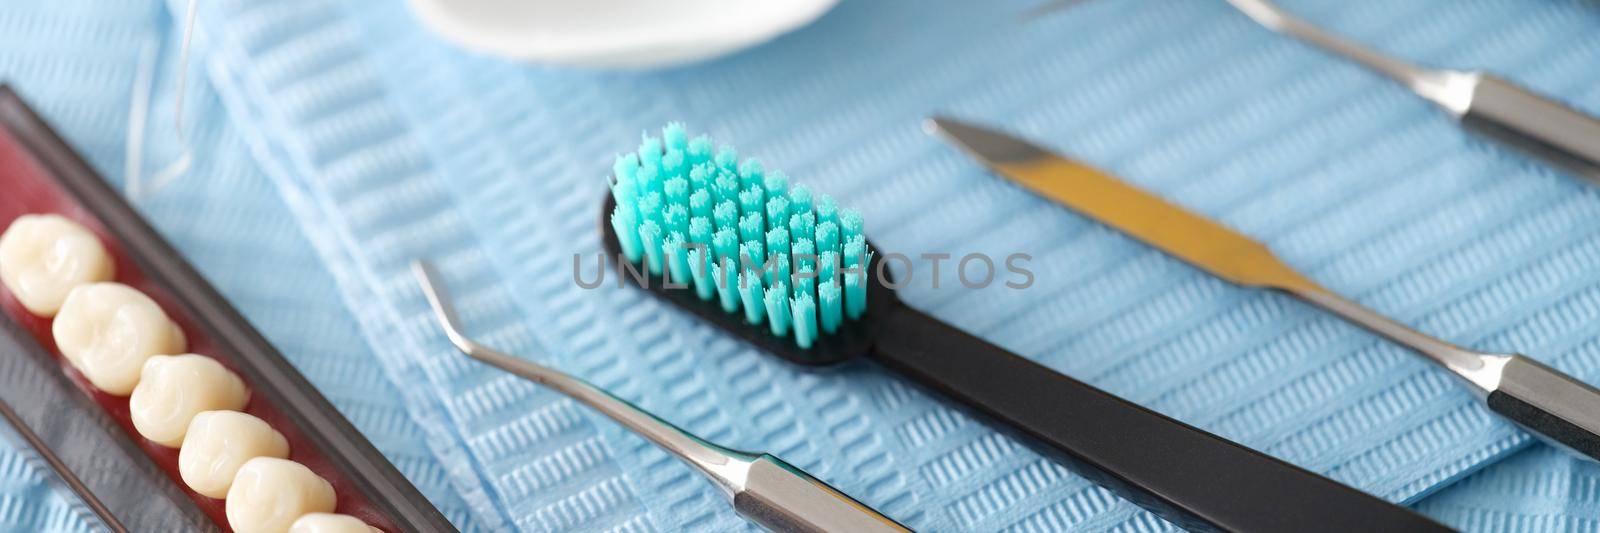 Dental instrument dental floss and dental implants closeup by kuprevich